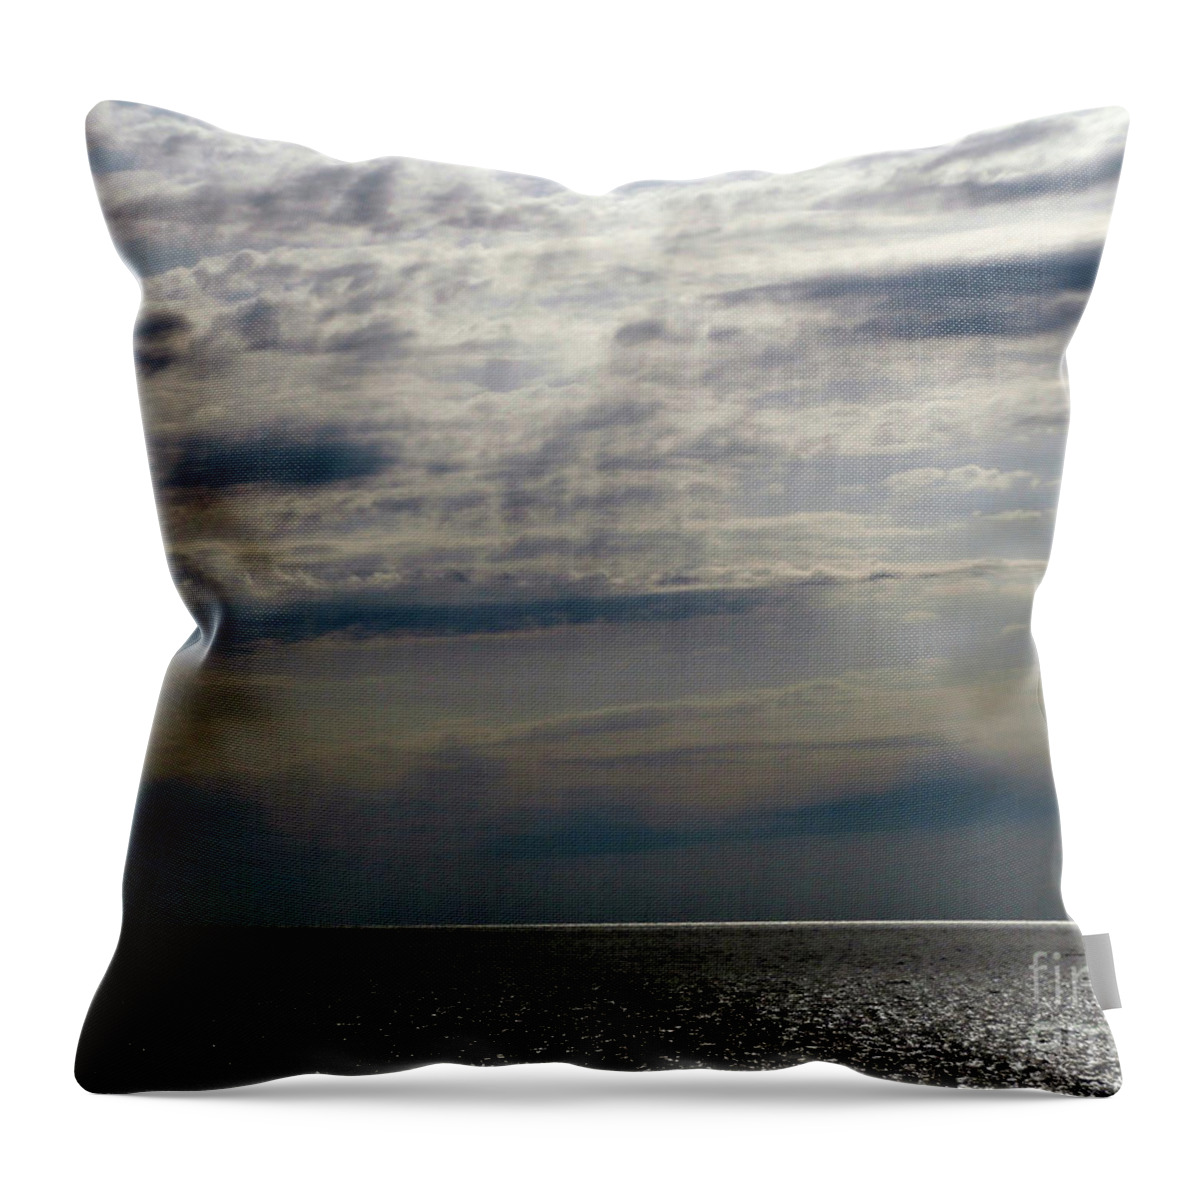 Hdr Throw Pillow featuring the mixed media HDR Storm Over The Water by Joseph Baril